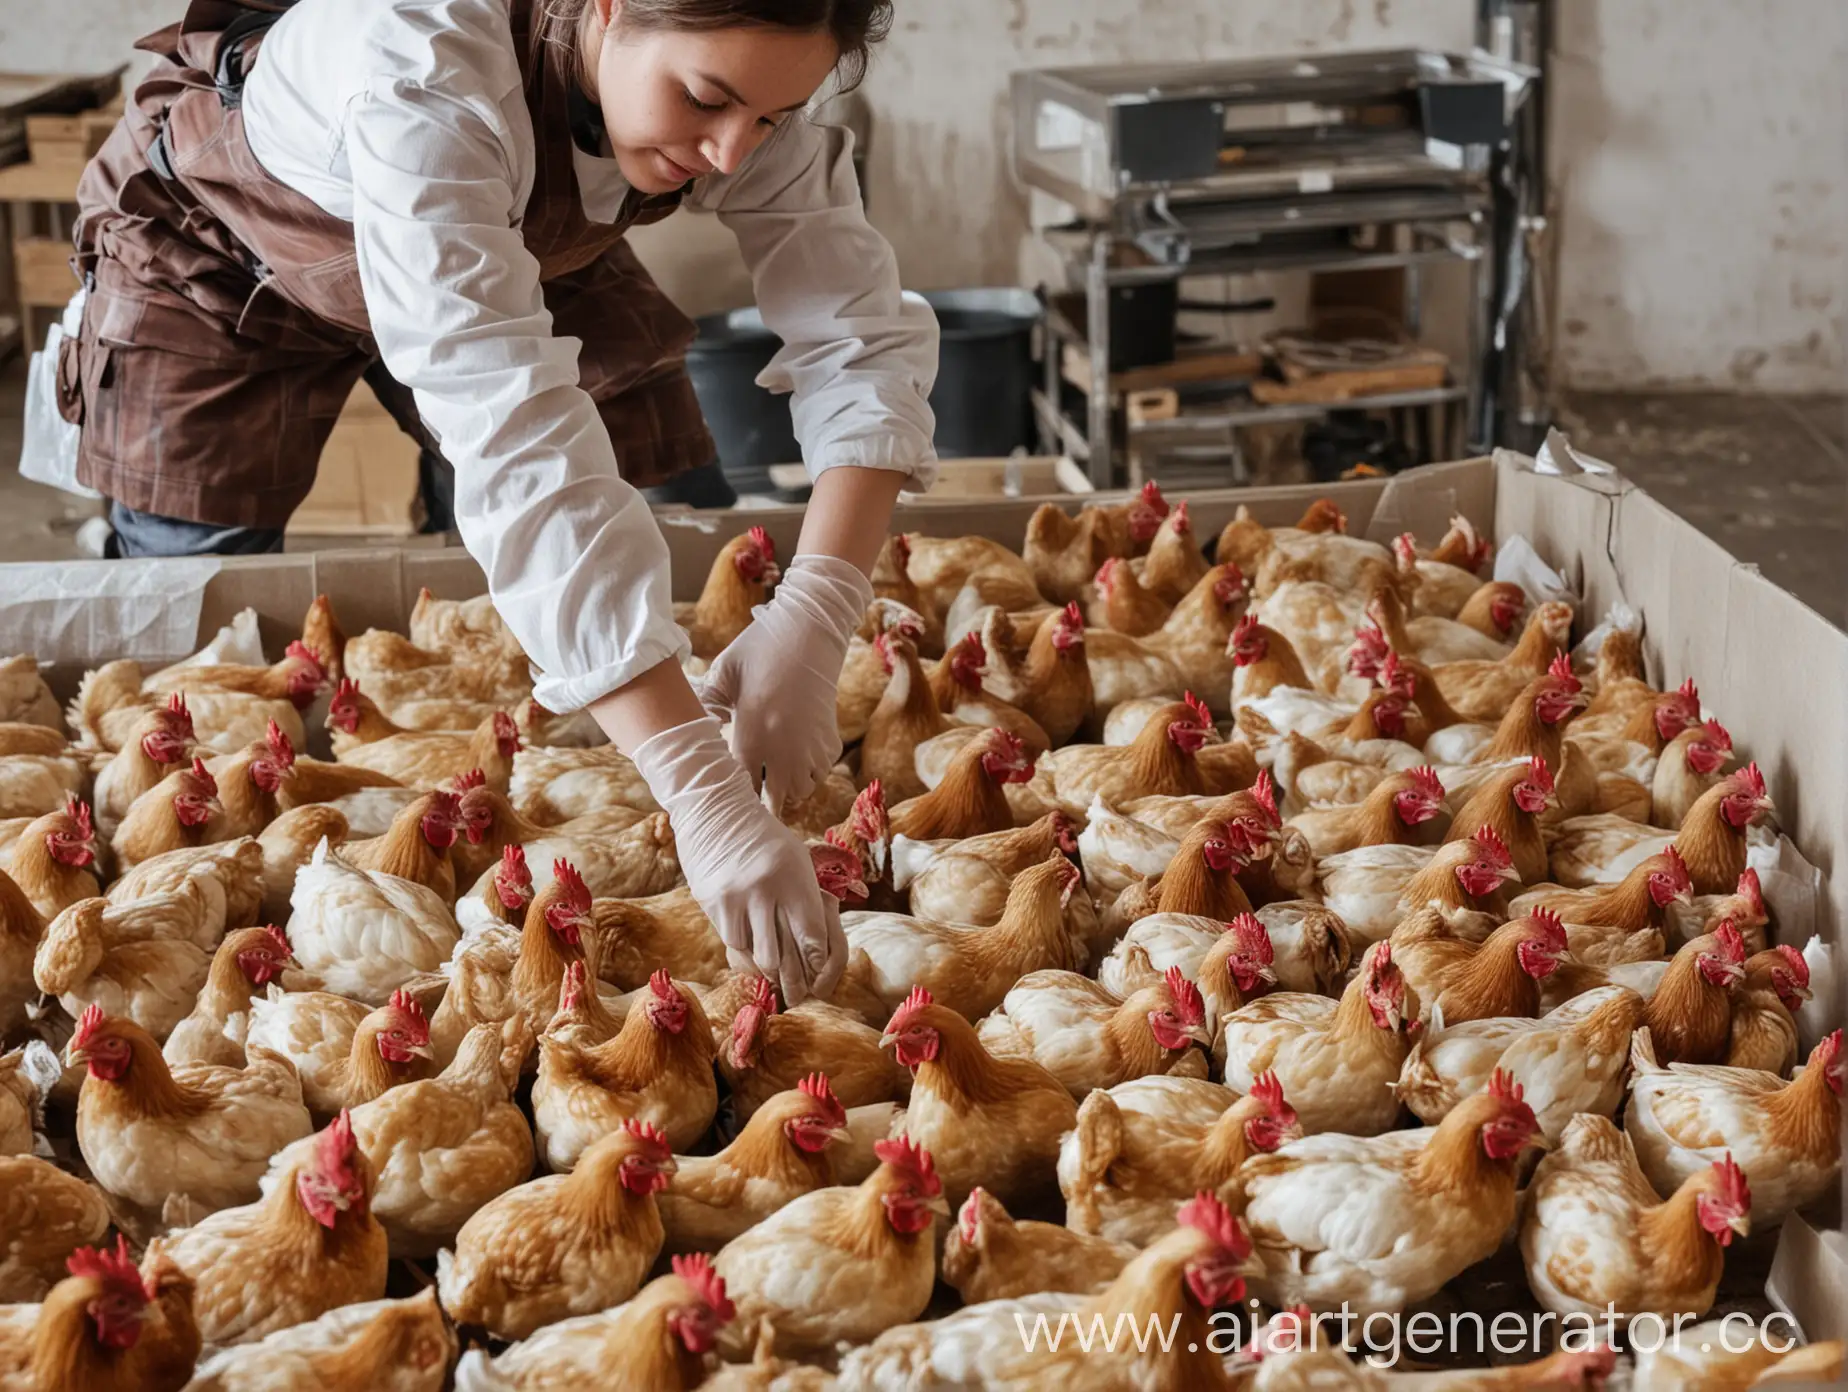 Workers-Packing-Chickens-Busy-Day-at-the-Poultry-Processing-Plant